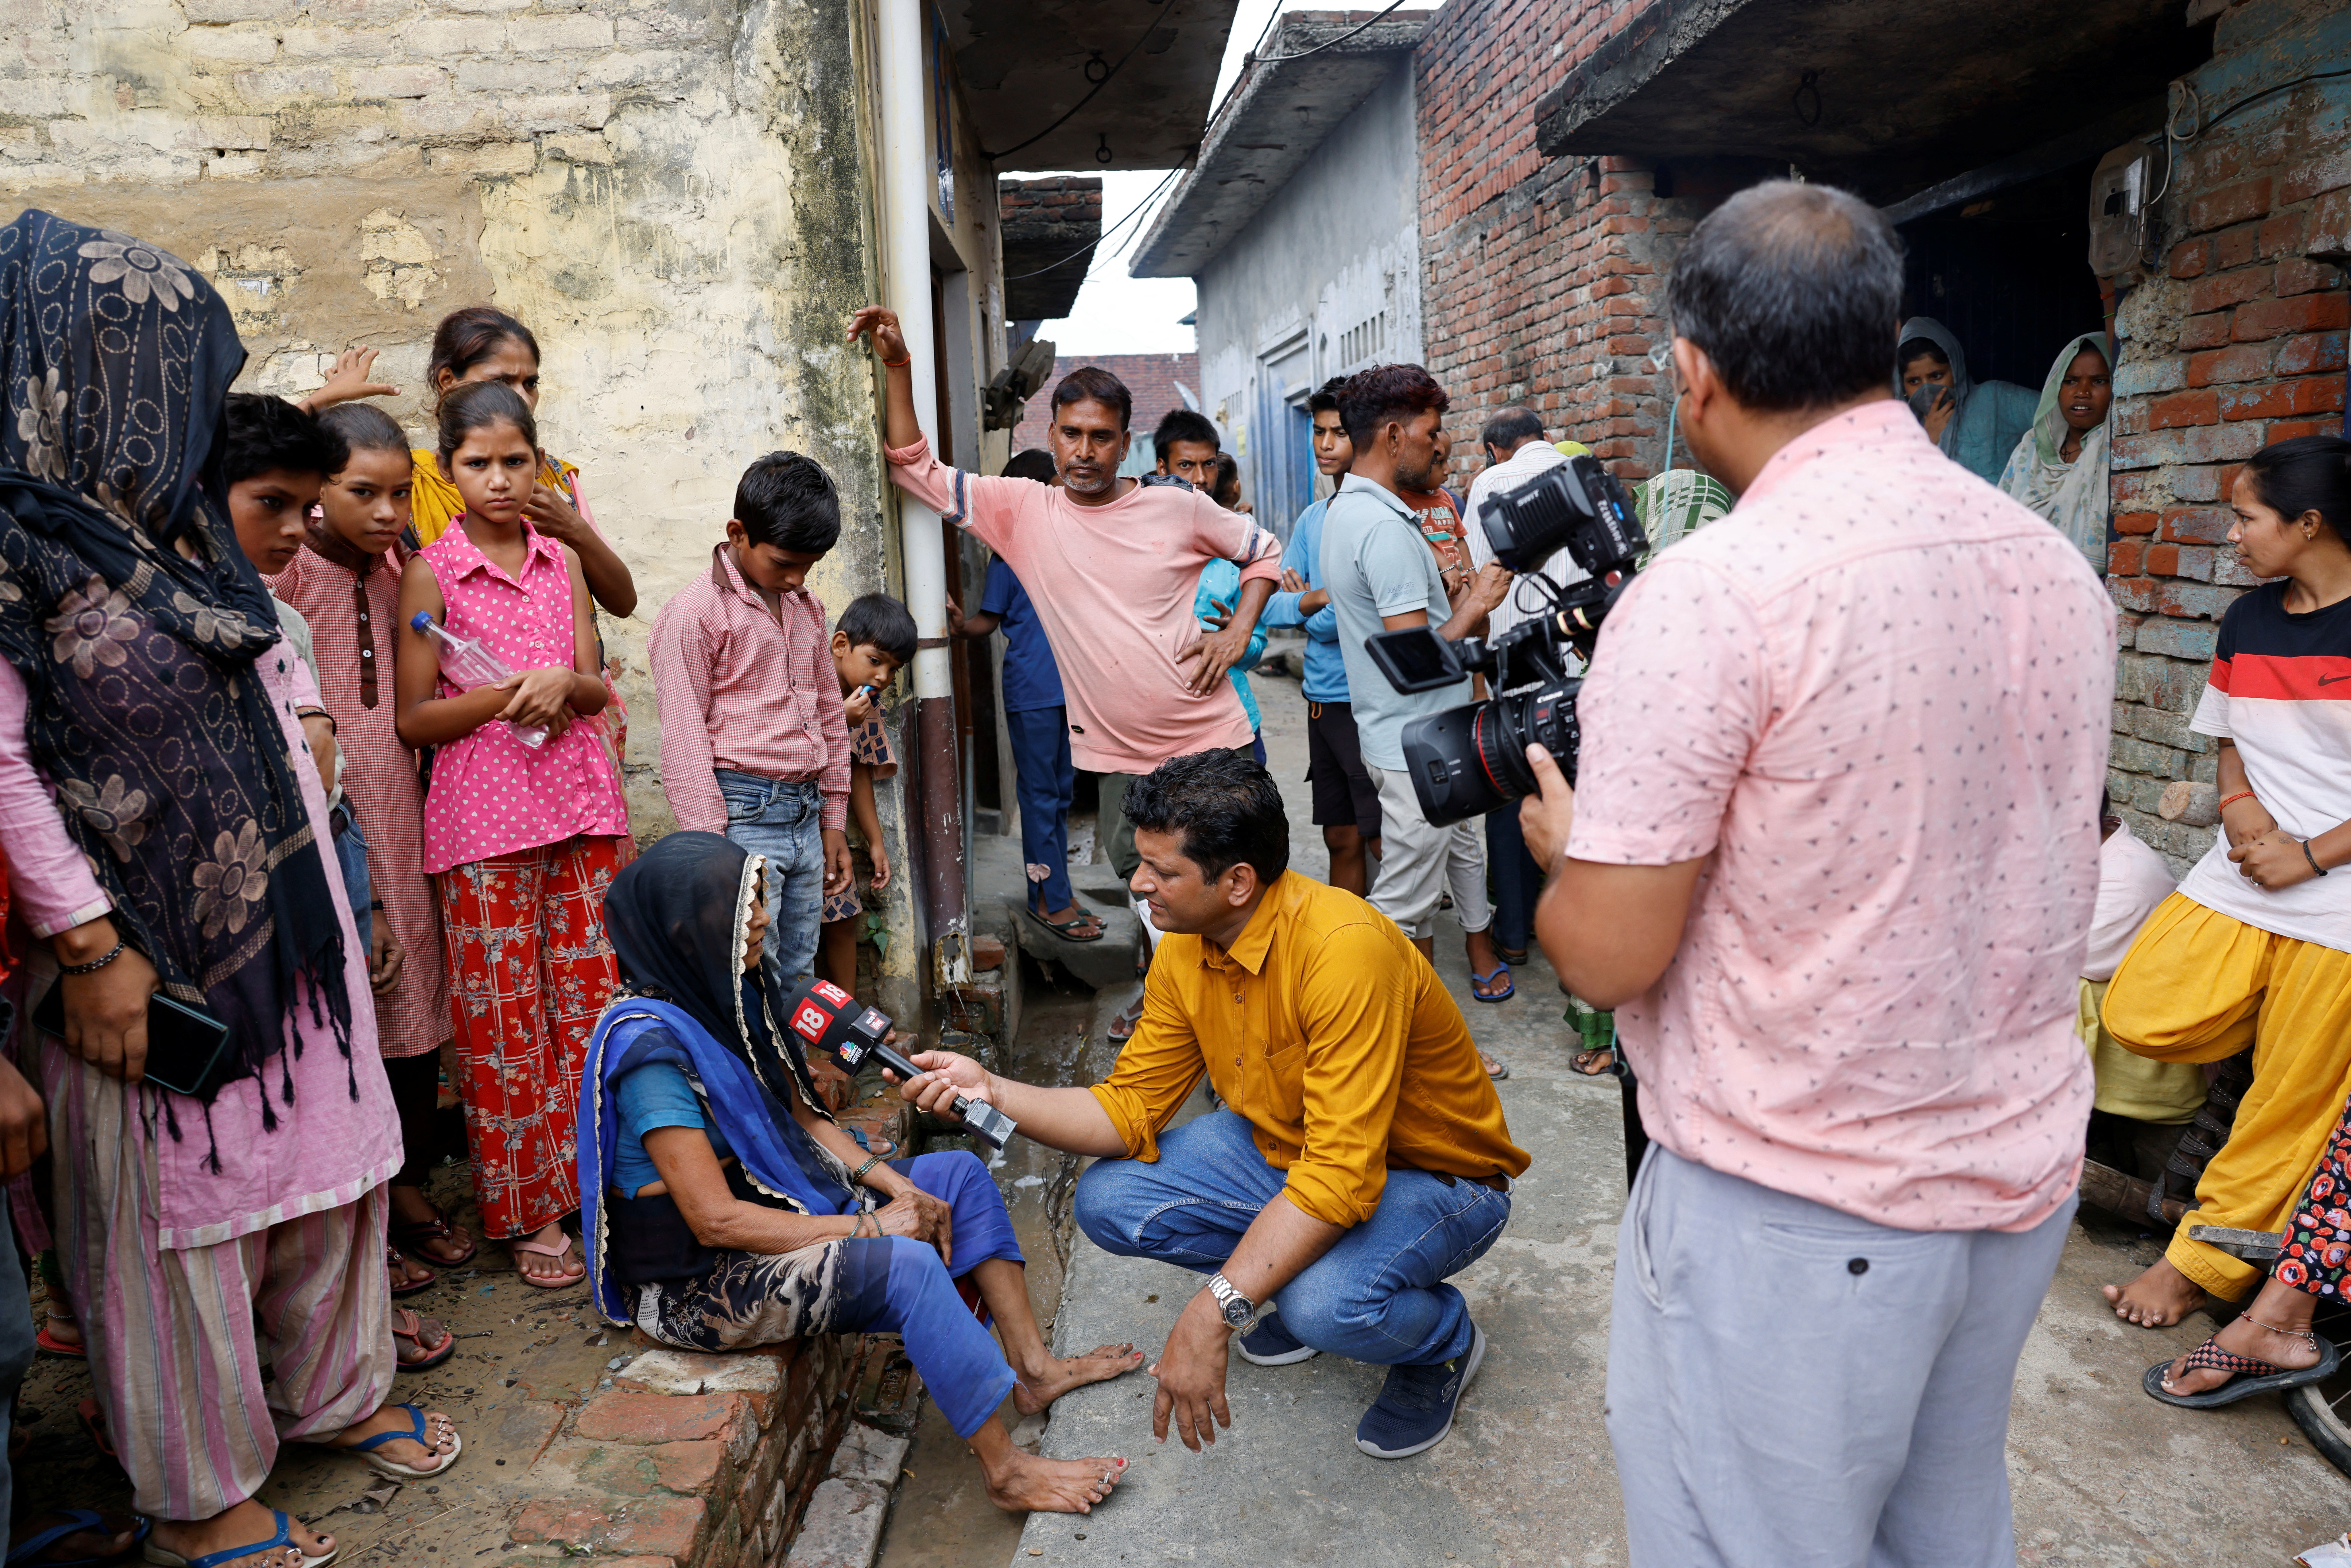 A news reporter interviews people in the village where Suraj Pal, also known as 'Bhole Baba', grew up, in Bahadurnagar in the northern state of Uttar Pradesh